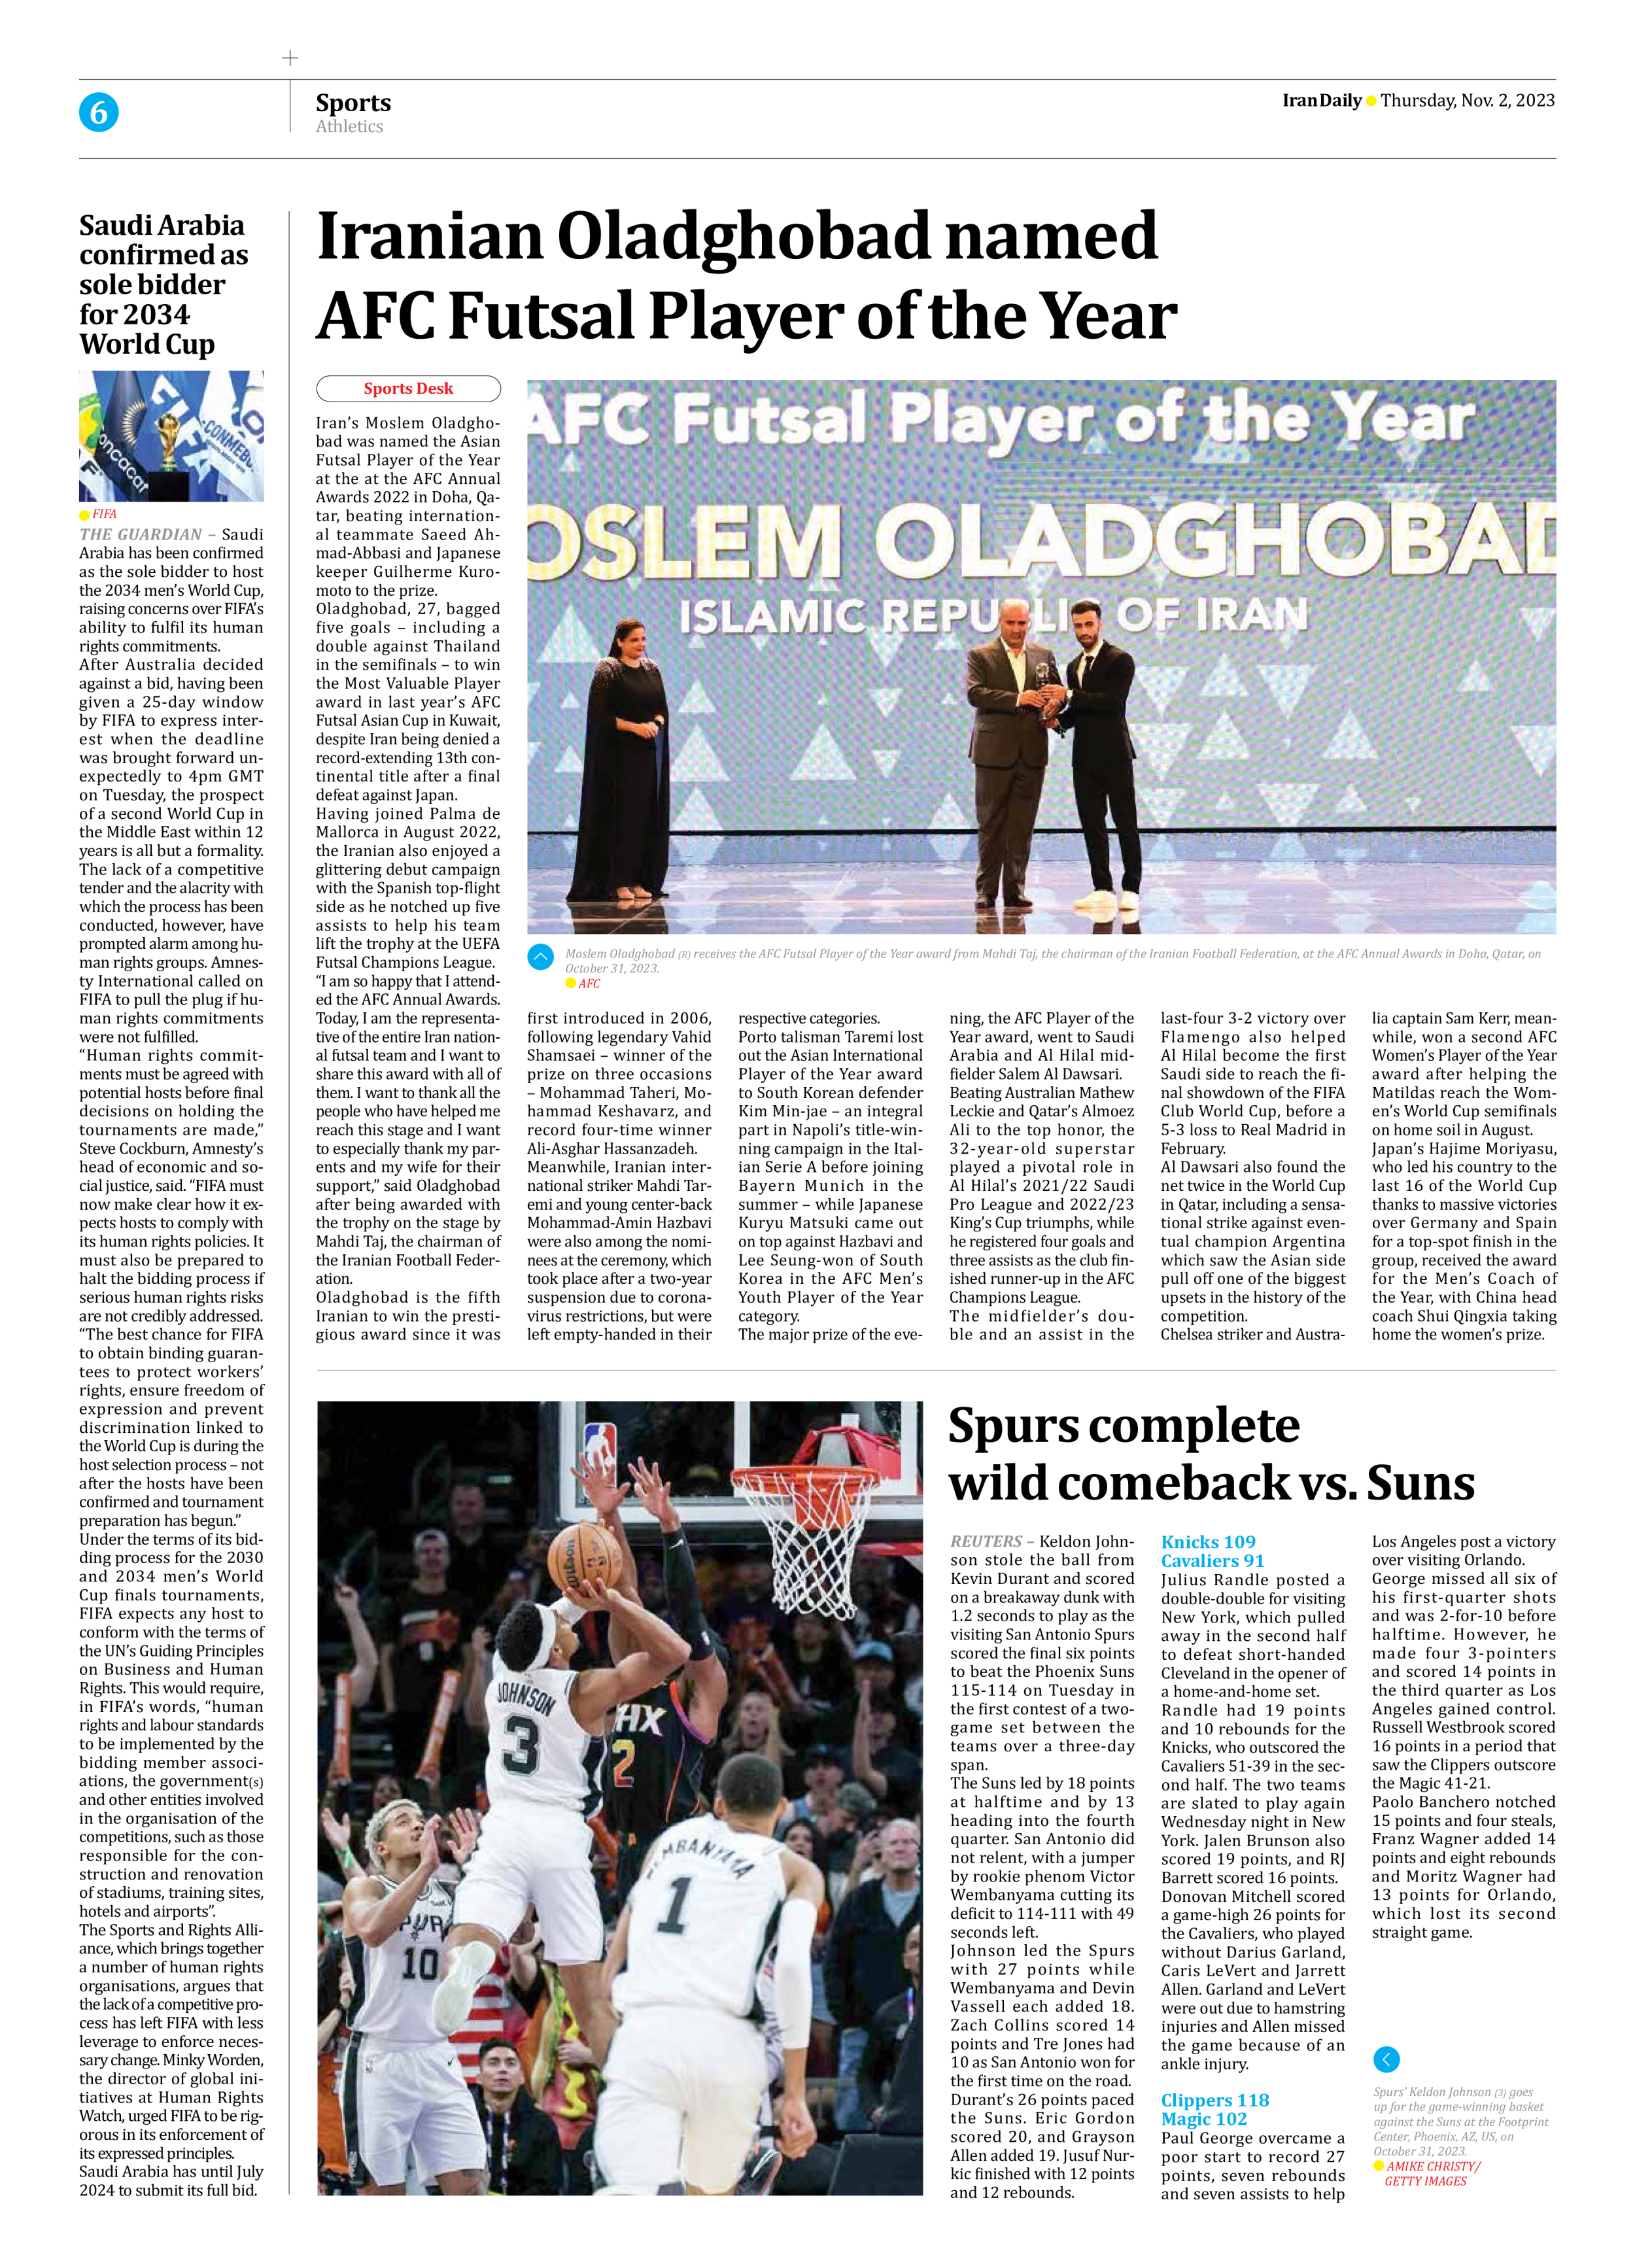 Iran Daily - Number Seven Thousand Four Hundred and Twenty Four - 02 November 2023 - Page 6